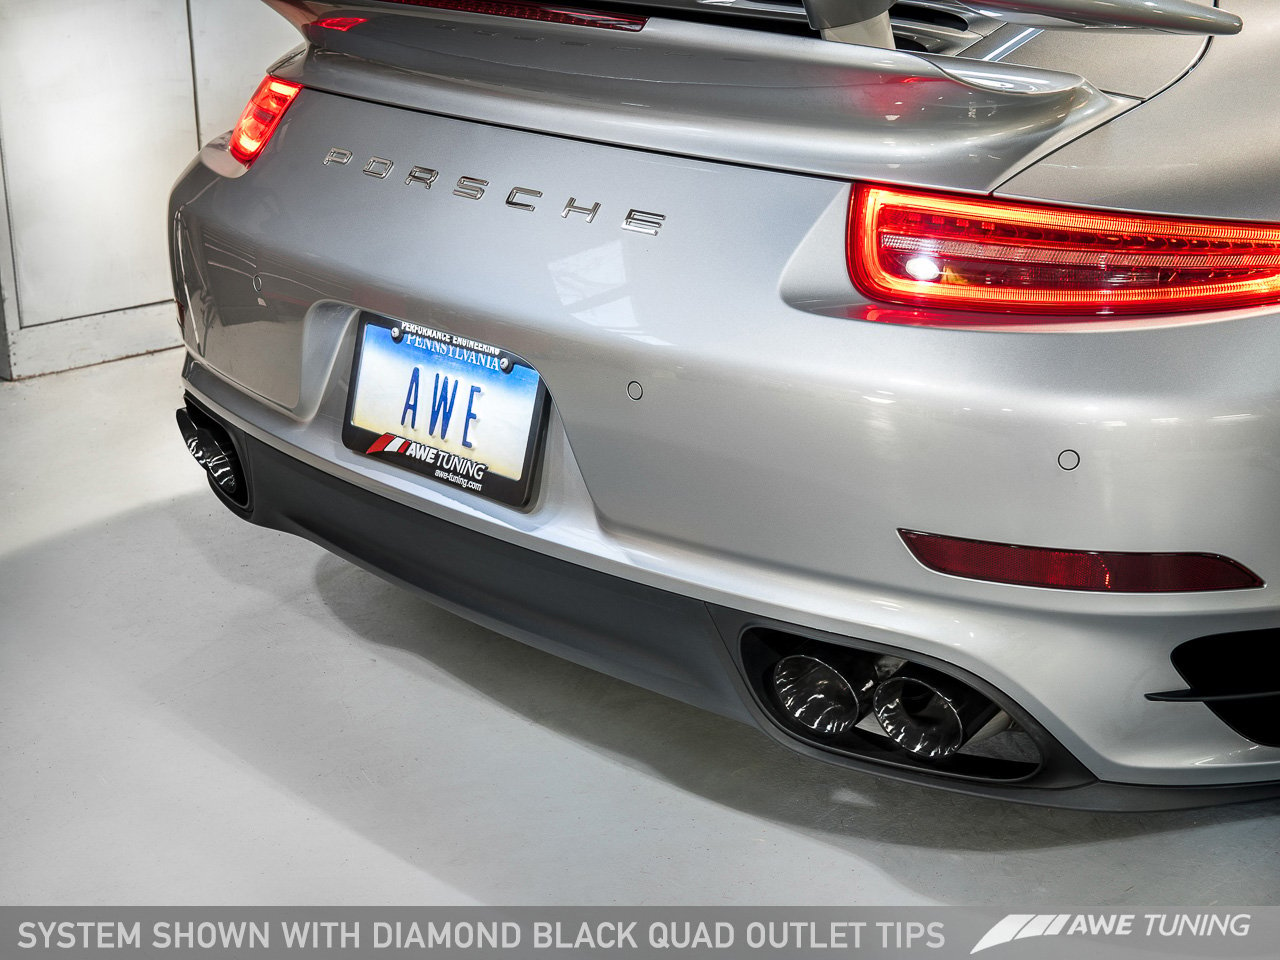 AWE Performance Exhaust and High-Flow Cat Sections for Porsche 991 Turbo - Diamond Black Quad Tips